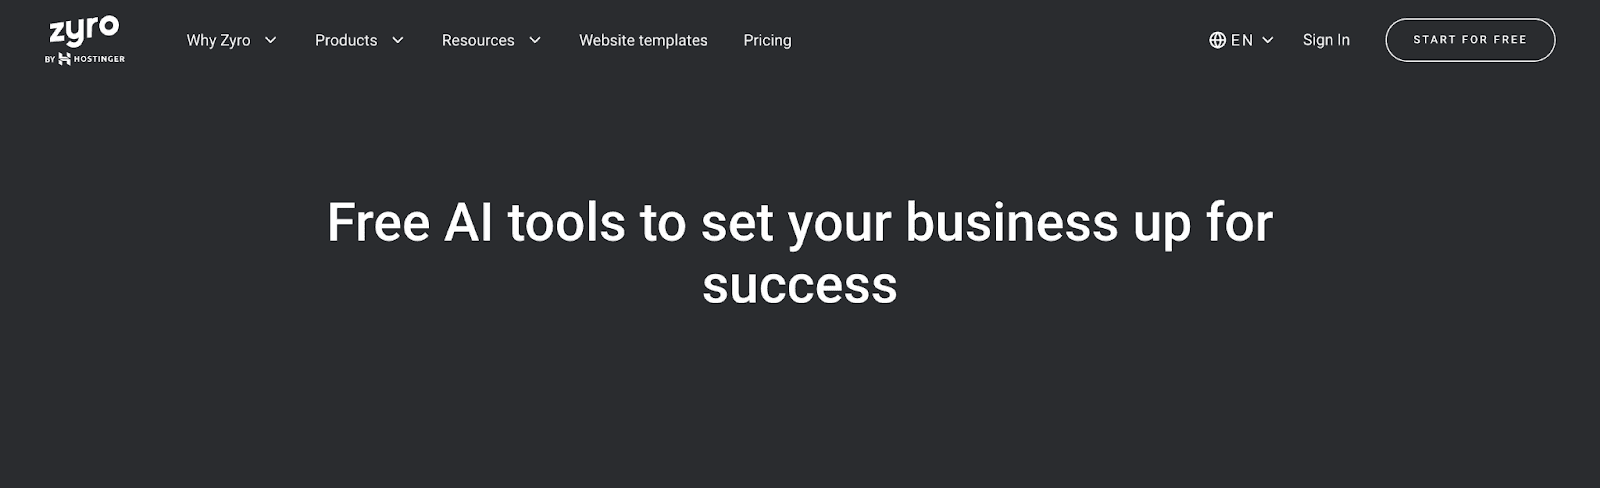 Zyro website - Free AI tools to set your business up for success